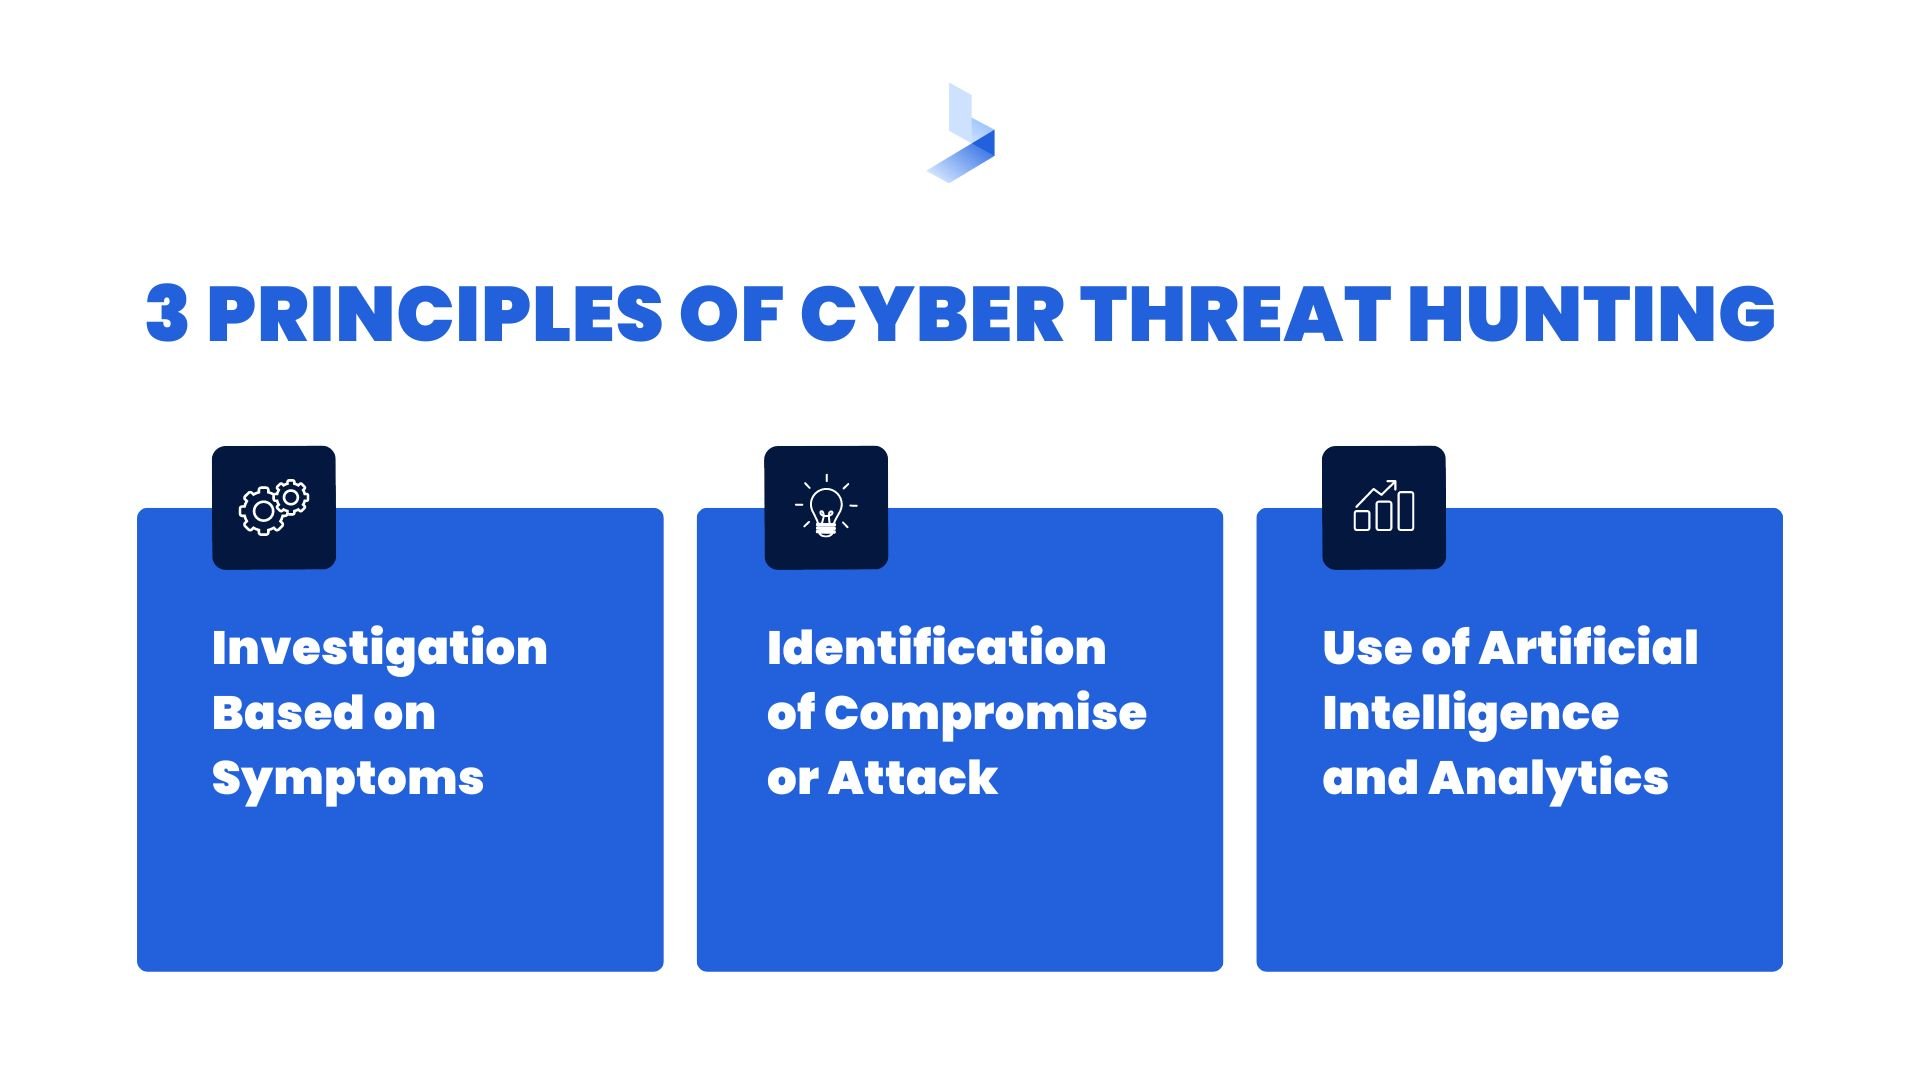 3 Principles of Cyber Threat Hunting